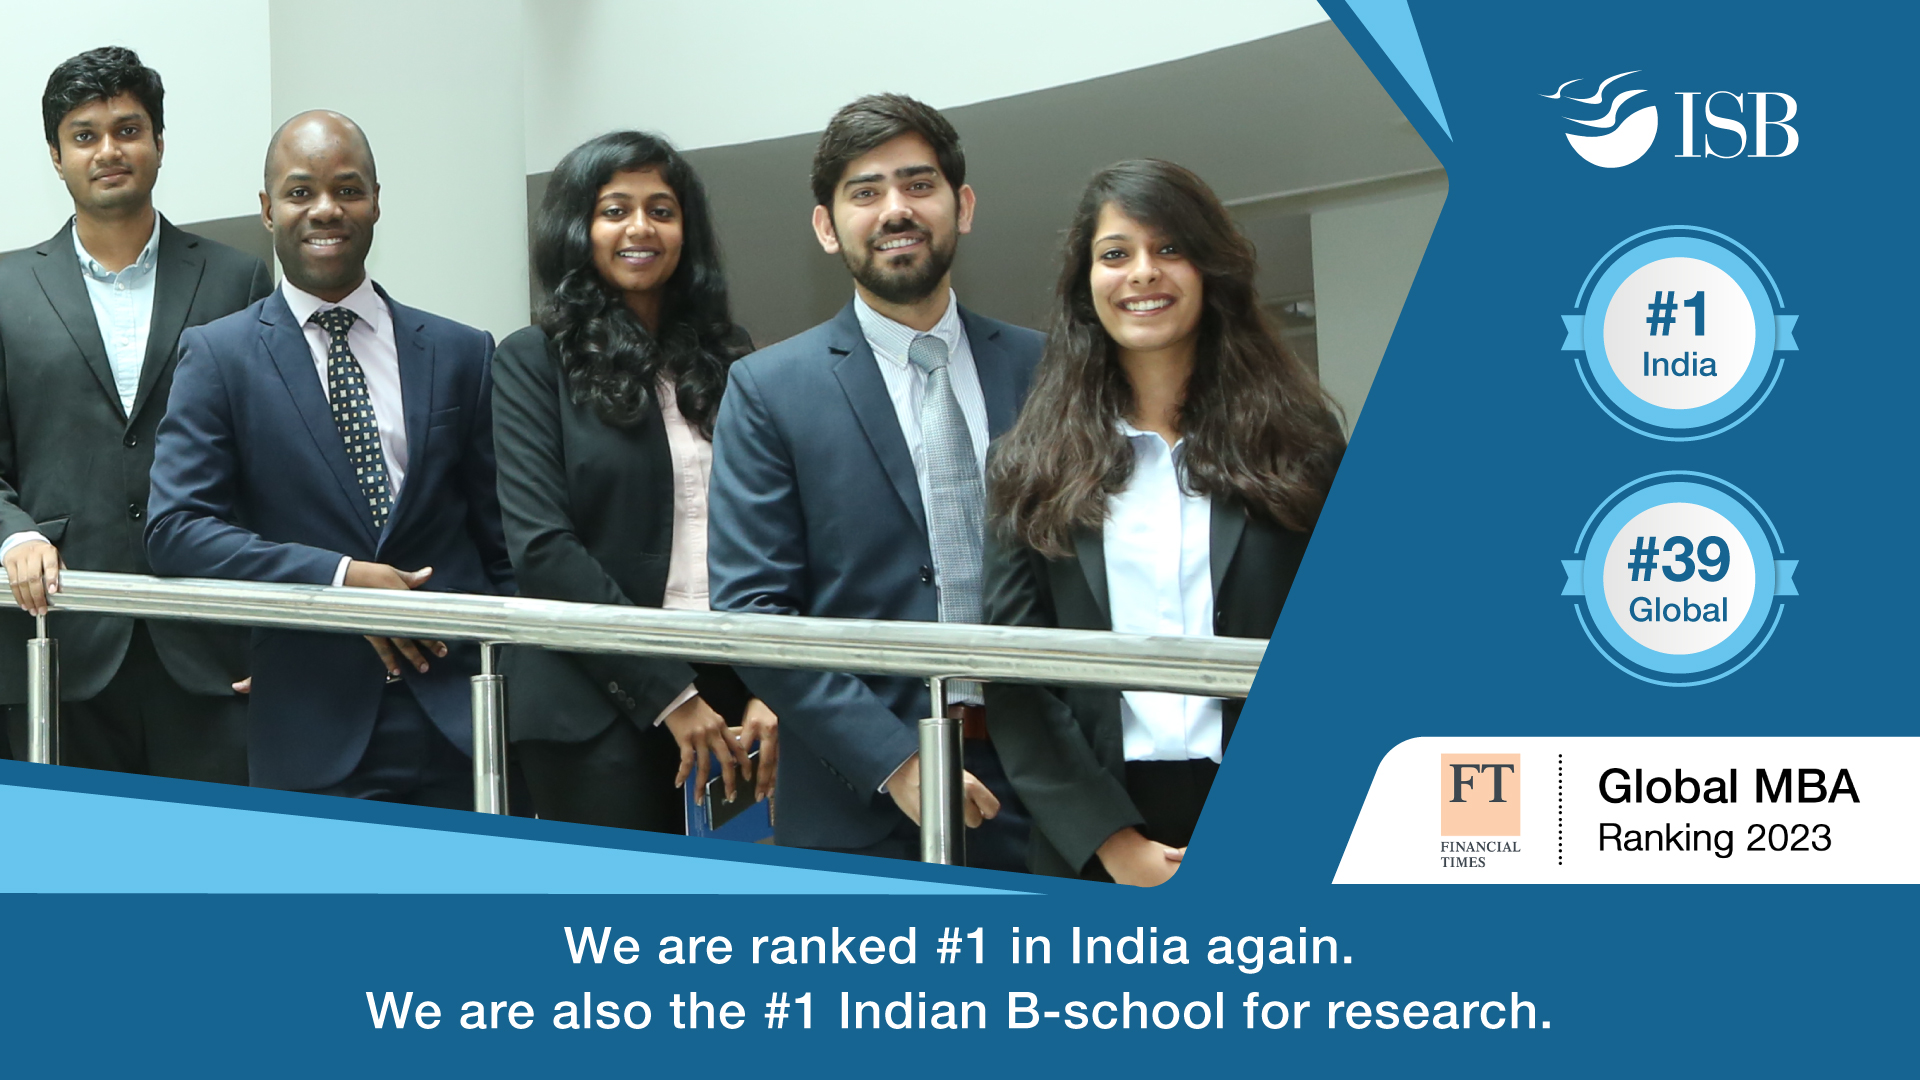 We are the #1 Indian B-school in the FT Global MBA Ranking 2023. Also #1 for research in India.